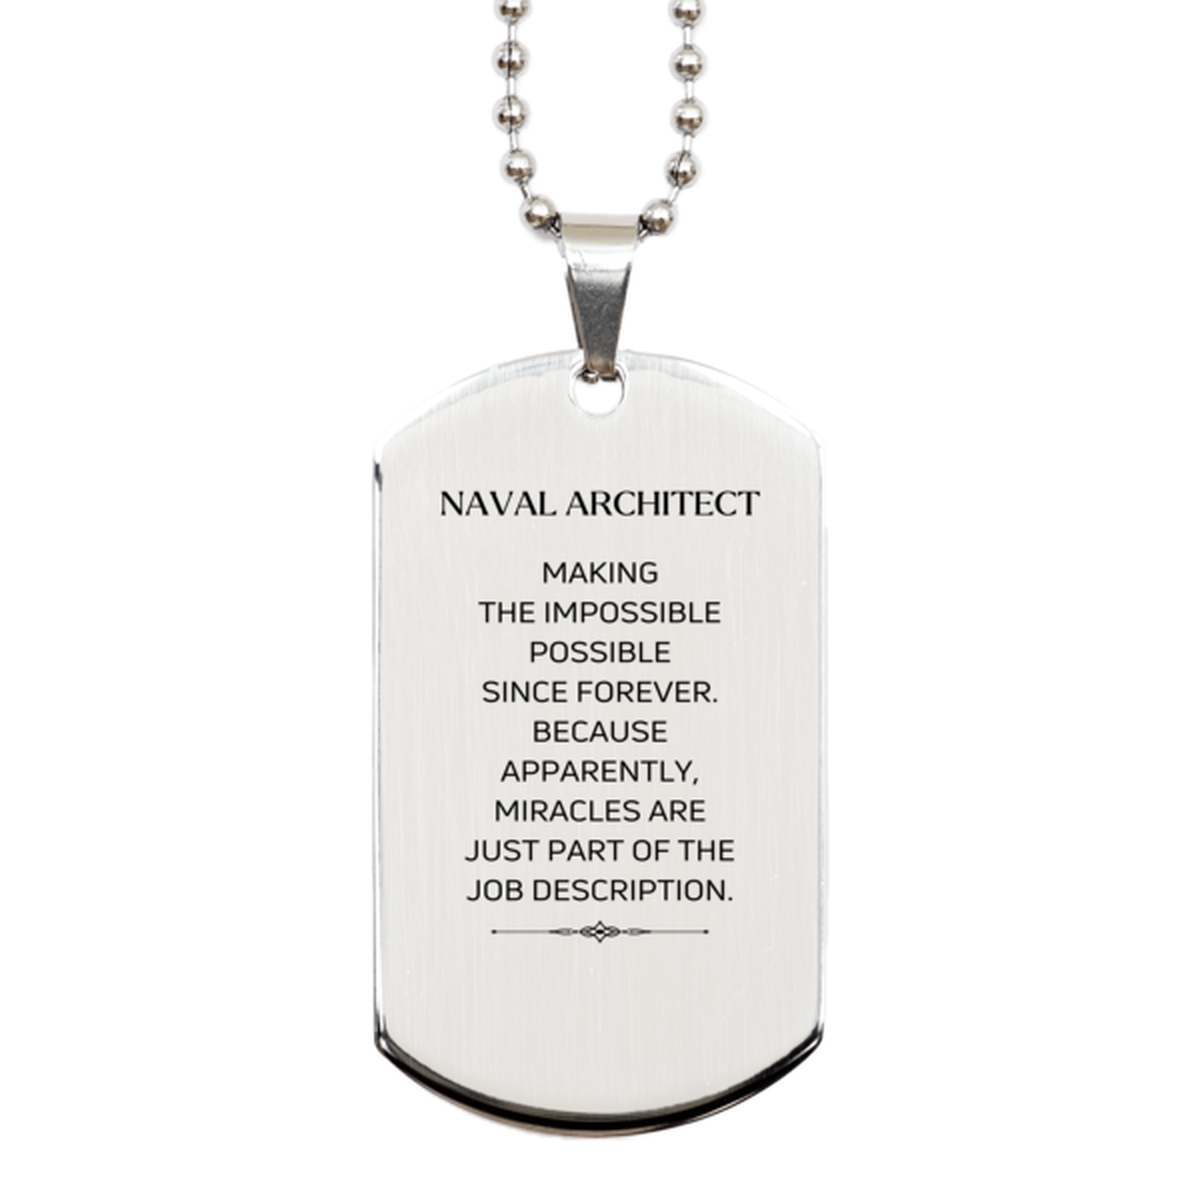 Funny Naval Architect Gifts, Miracles are just part of the job description, Inspirational Birthday Silver Dog Tag For Naval Architect, Men, Women, Coworkers, Friends, Boss